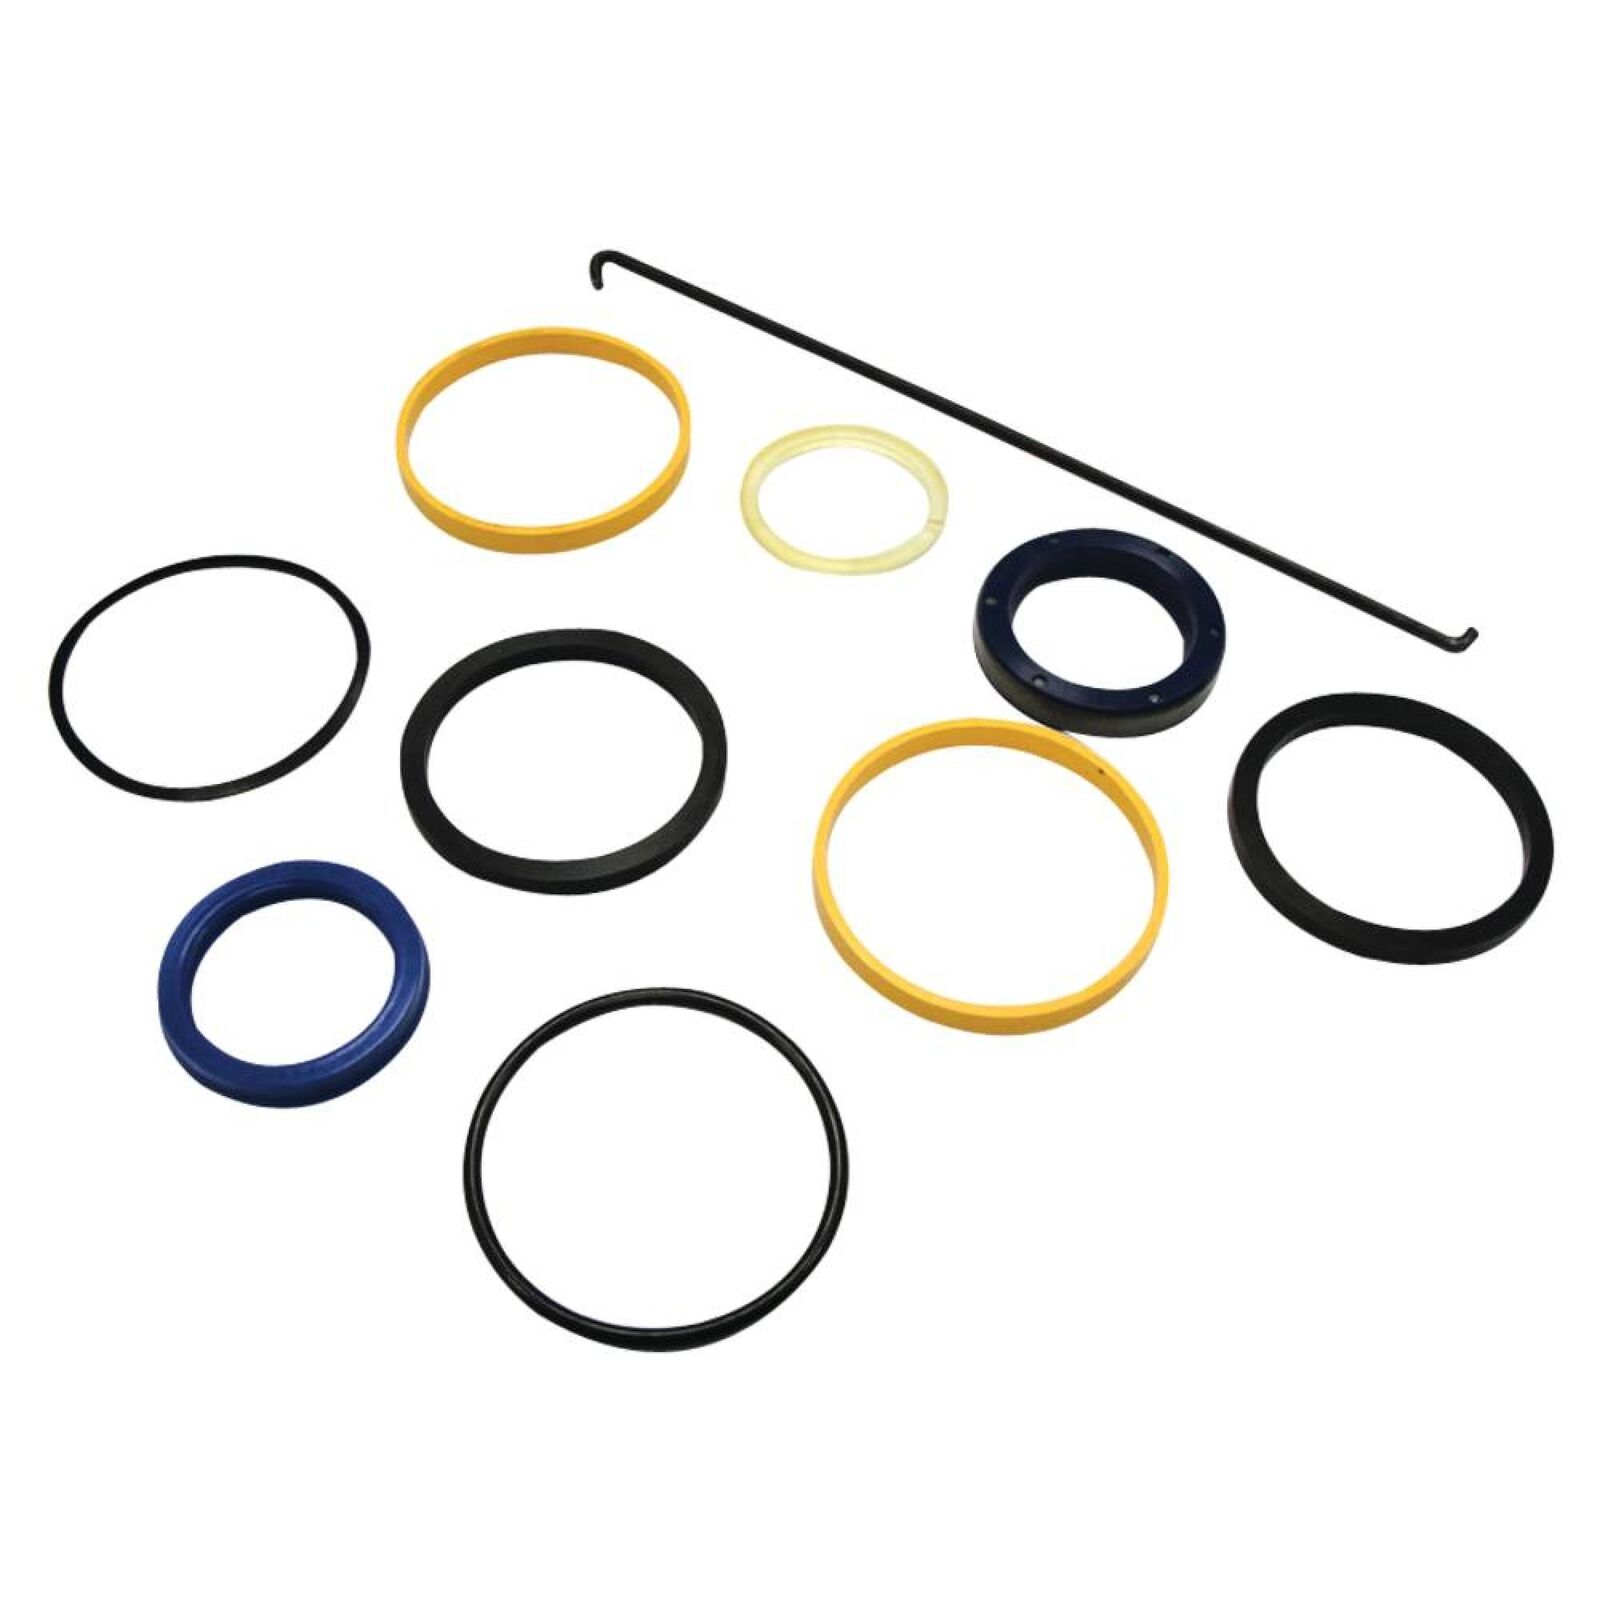 New Total Power Parts Hydraulic Cylinder Seal Kit For Ford/New Holland FP419